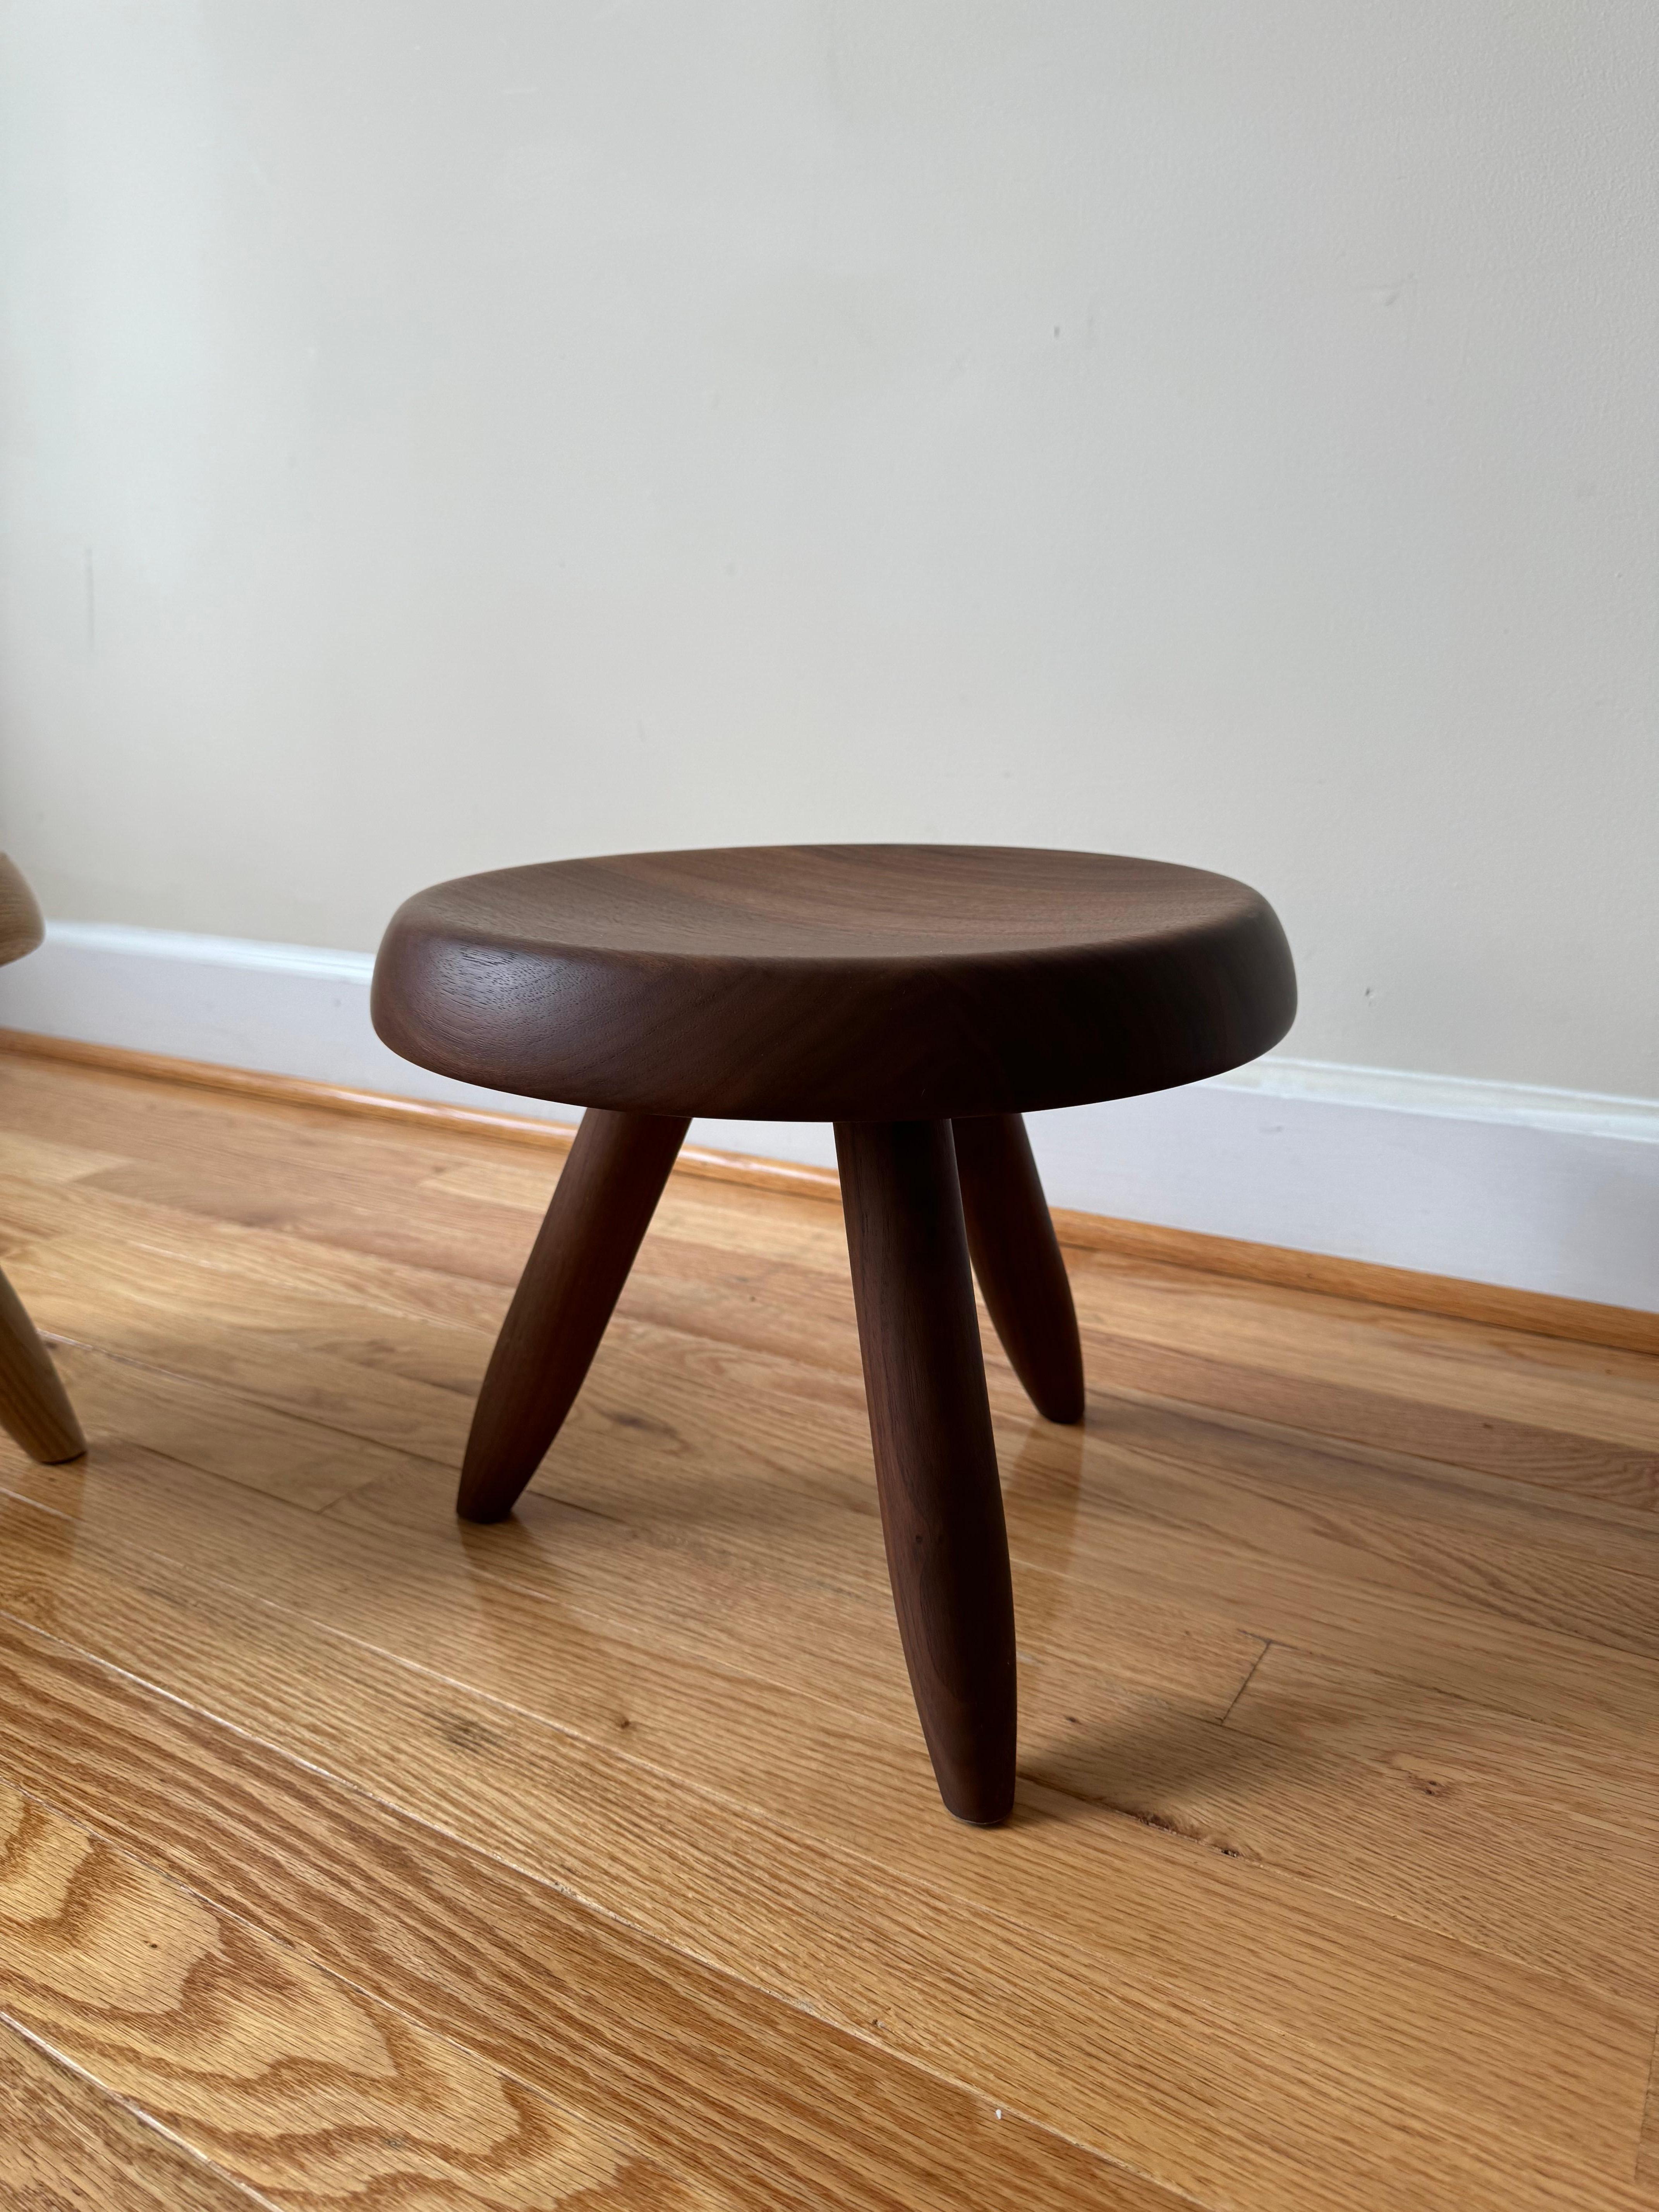 Mid-Century Modern Tabouret Berger (Berger Stool) by Charlotte Perriand for Cassina For Sale